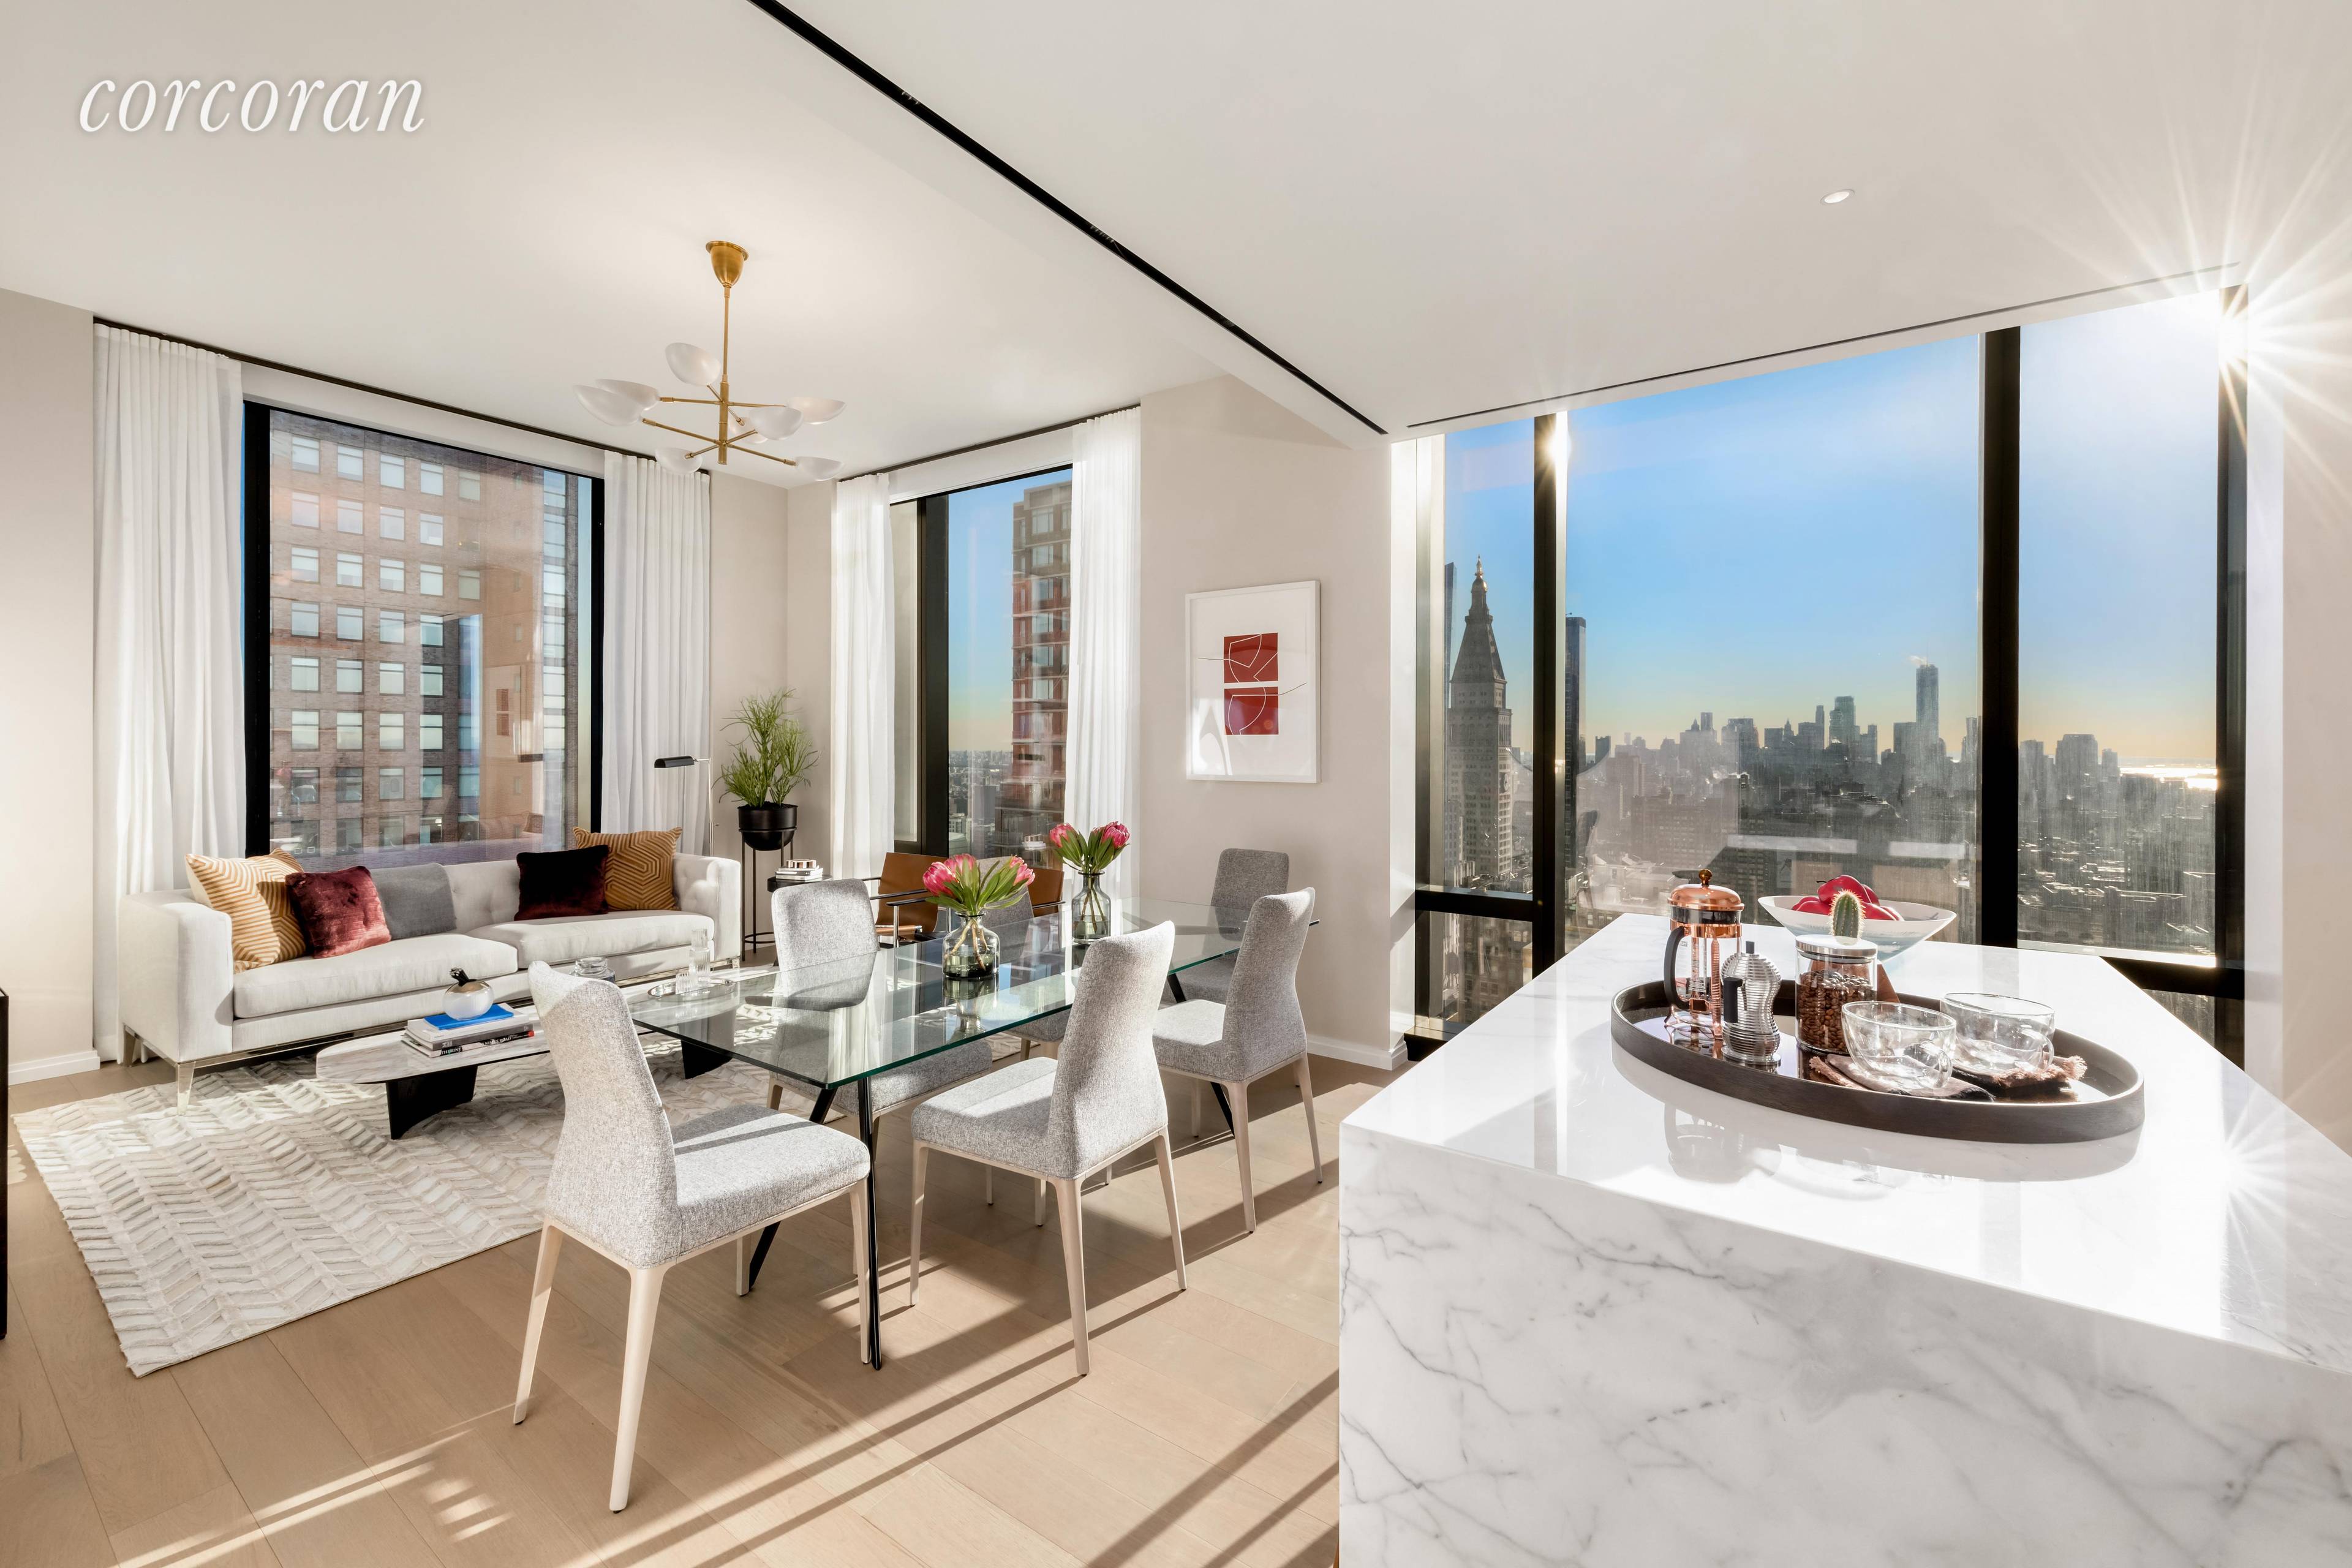 Luxury lives at 277 Fifth Avenue designed by world renown architect Rafael Vinoly and located in the heart of Manhattan's NoMad, the new epicenter of a chic and luxurious downtown ...